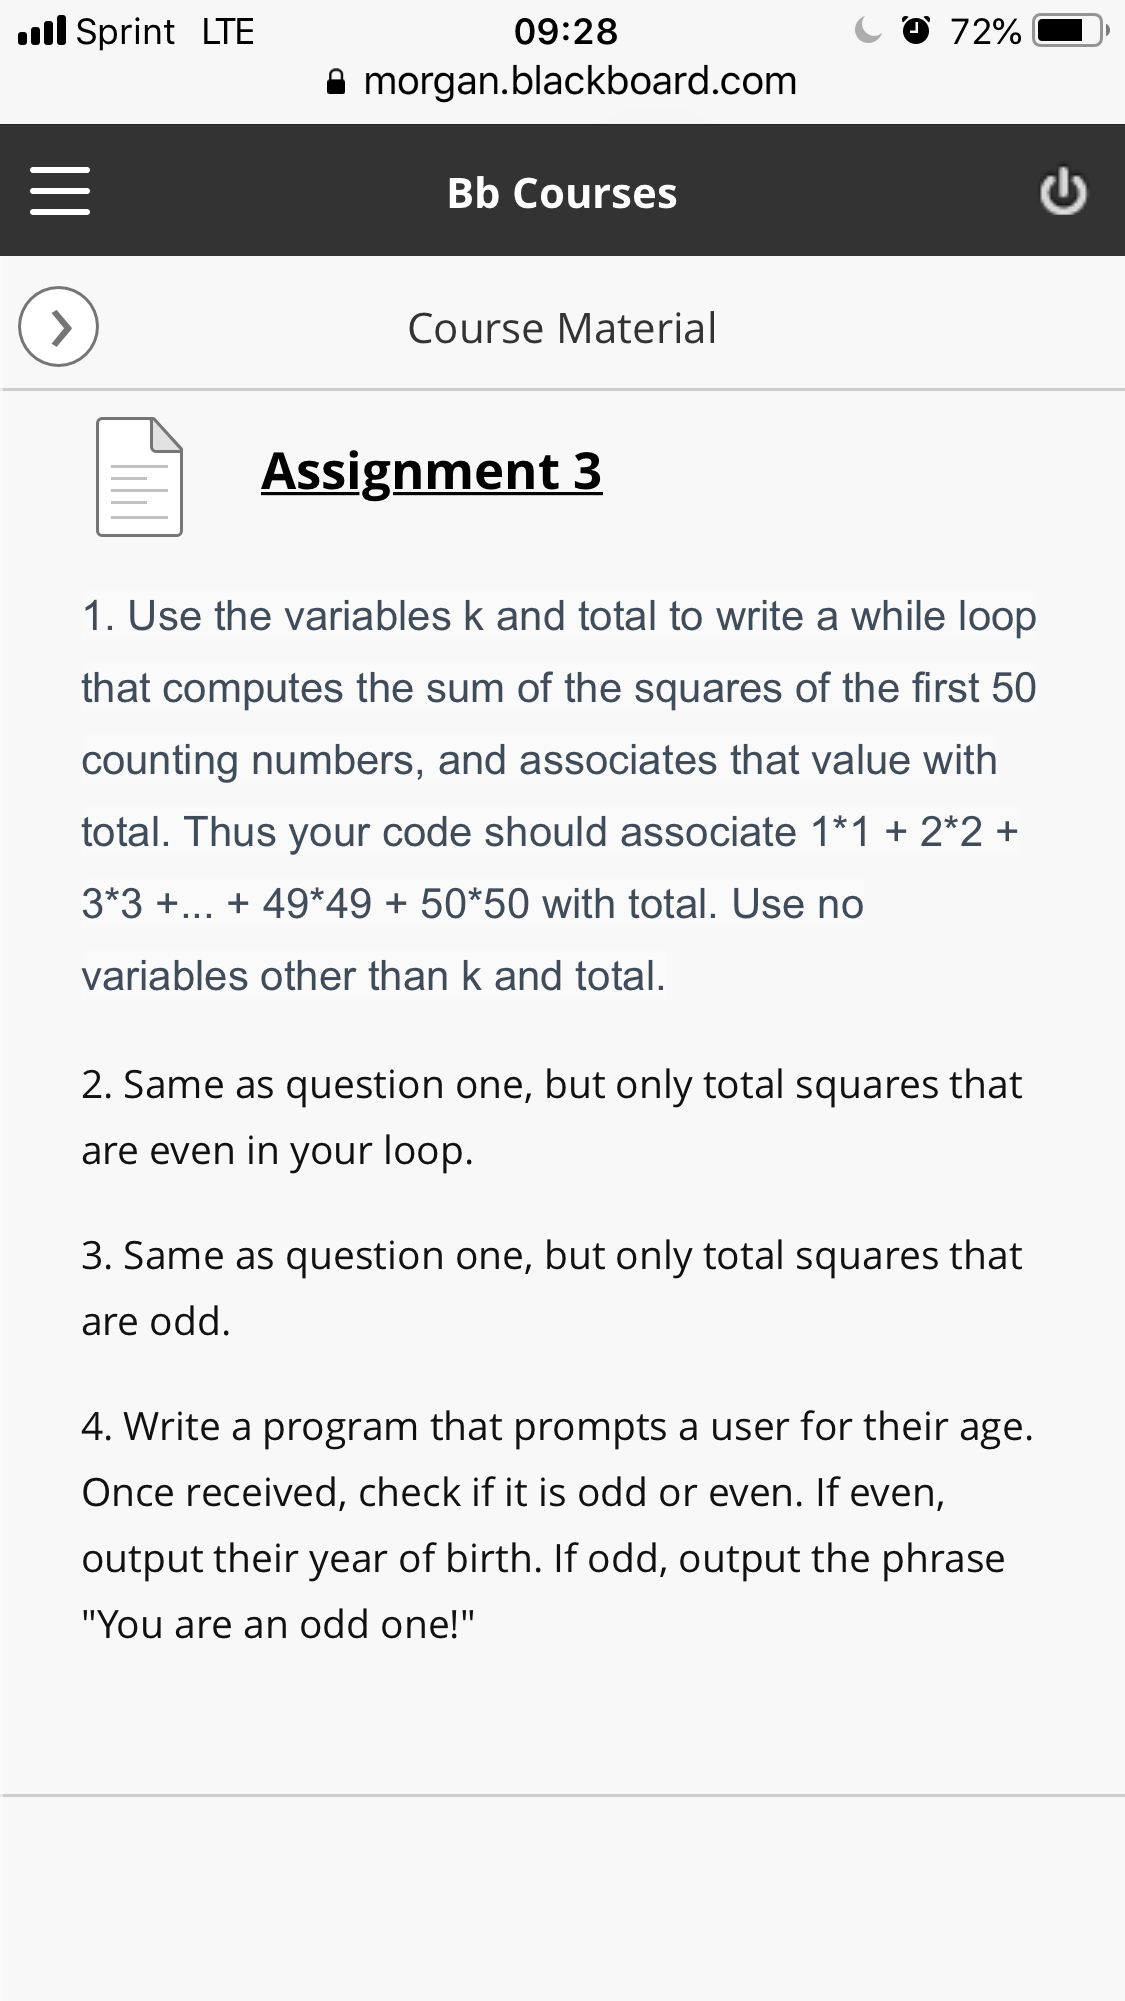 l Sprint LTE
09:28
9 morgan.blackboard.com
Bb Courses
Course Material
Assignment 3
1. Use the variables k and total to write a while loop
that computes the sum of the squares of the first 50
counting numbers, and associates that value with
total. Thus your code should associate 1*1 +2*2+
3*3... 49*49 + 50*50 with total. Use no
variables other than k and total.
2. Same as question one, but only total squares that
are even in your loop.
3. Same as question one, but only total squares that
are odd
4. Write a program that prompts a user for their age.
Once received, check if it is odd or even. If even,
output their year of birth. If odd, output the phrase
"You are an odd one!"
